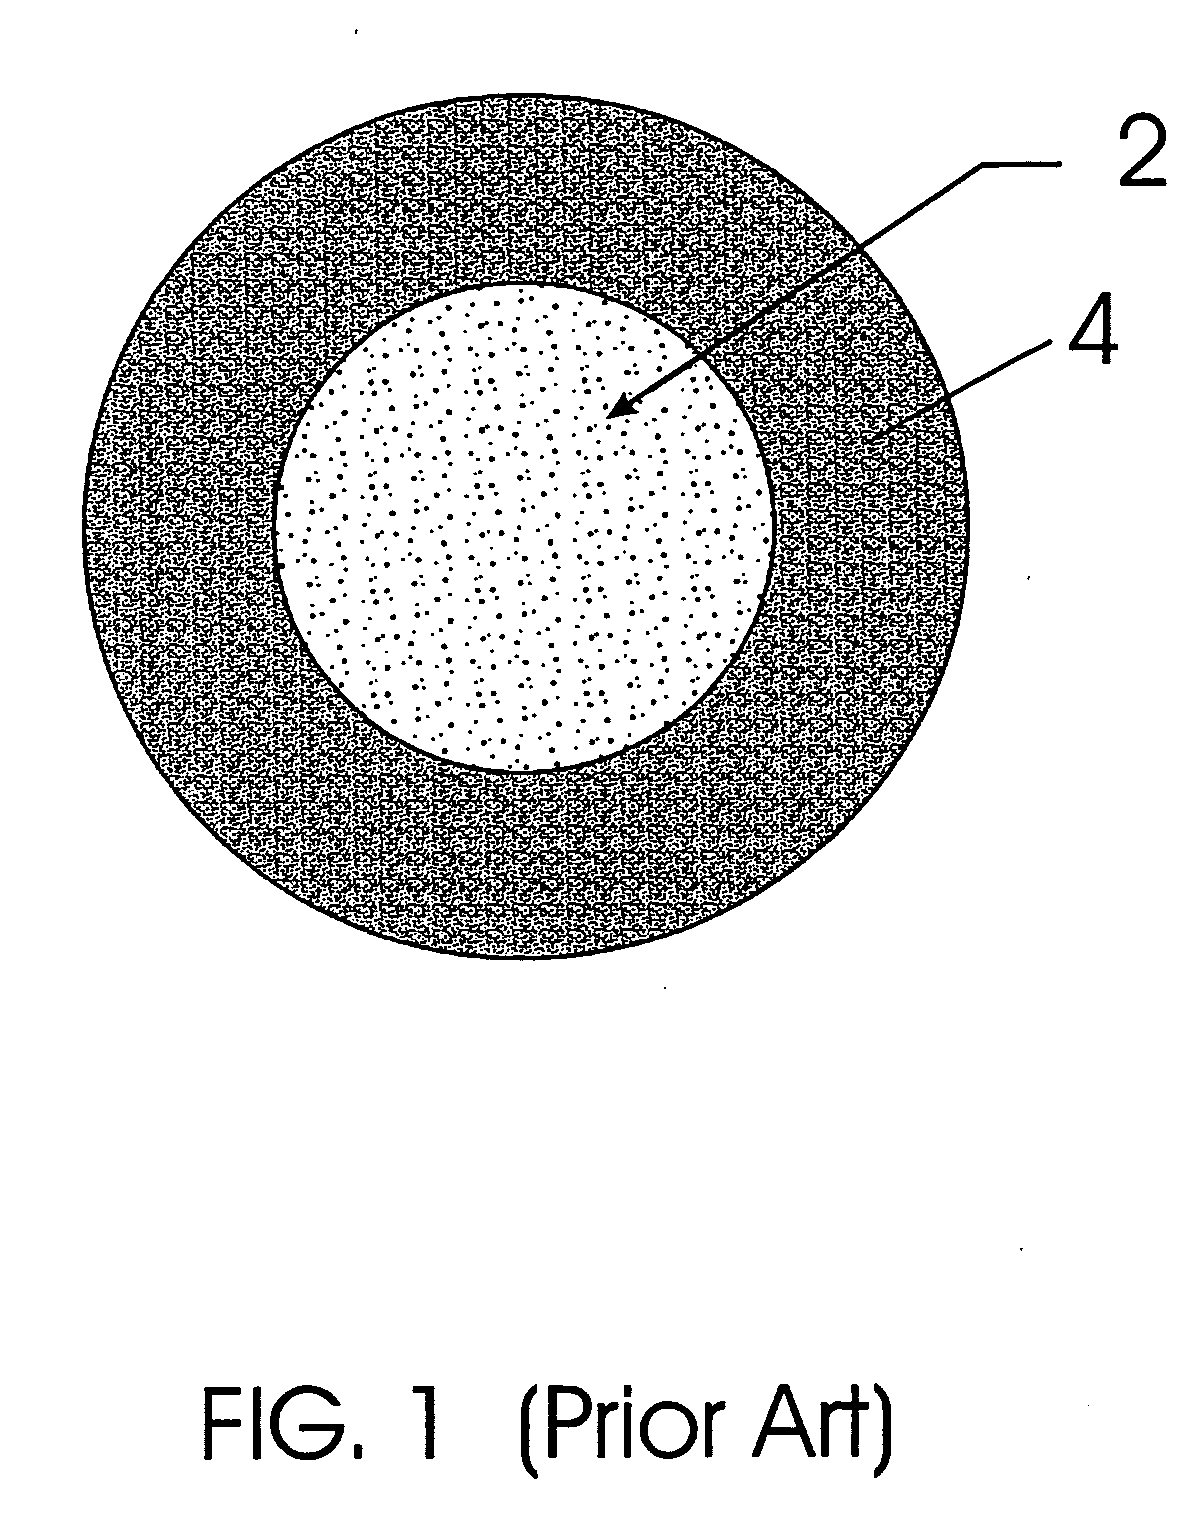 Process for incremental coating of proppants for hydraulic fracturing and proppants produced therefrom